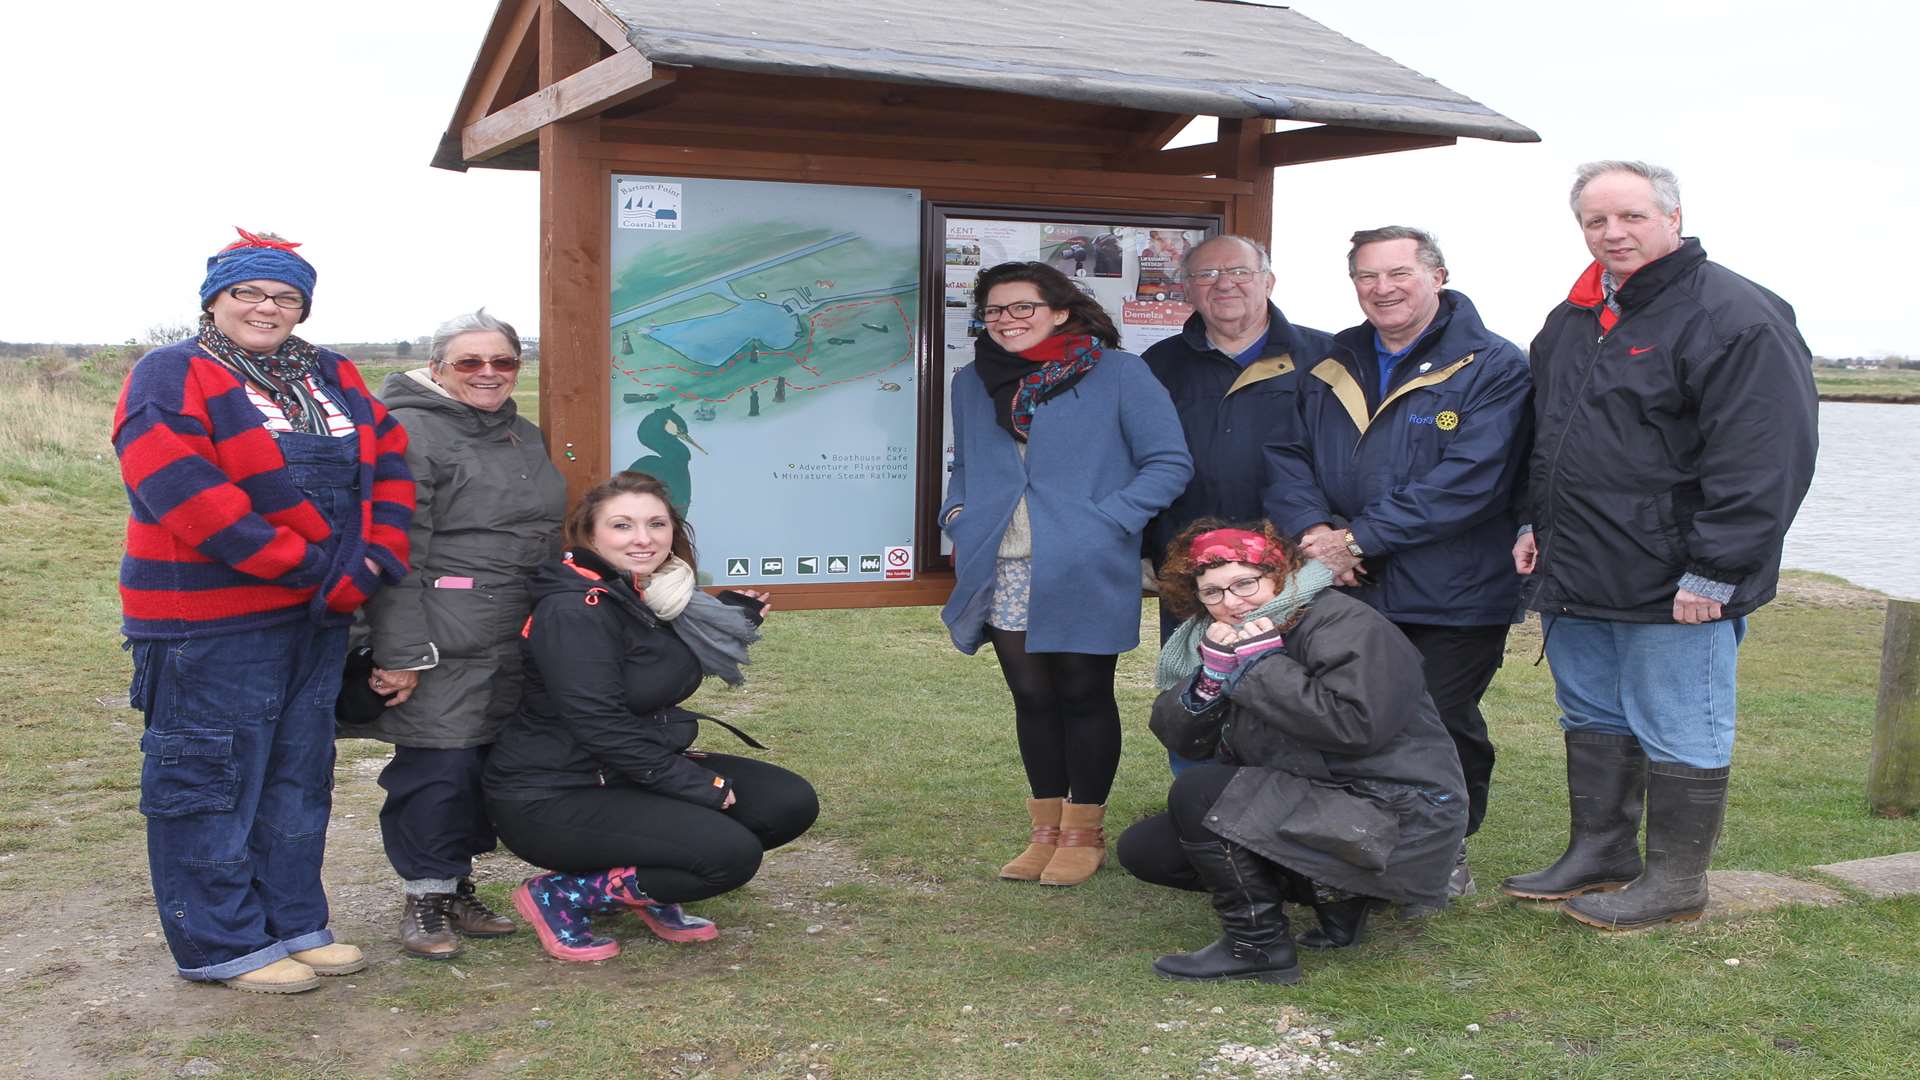 Heather Thomas-Pugh, project coordinator, second left, with members from Sheppey Matters and artists at the launch of the art and nature trail at Barton's Point, Sheerness